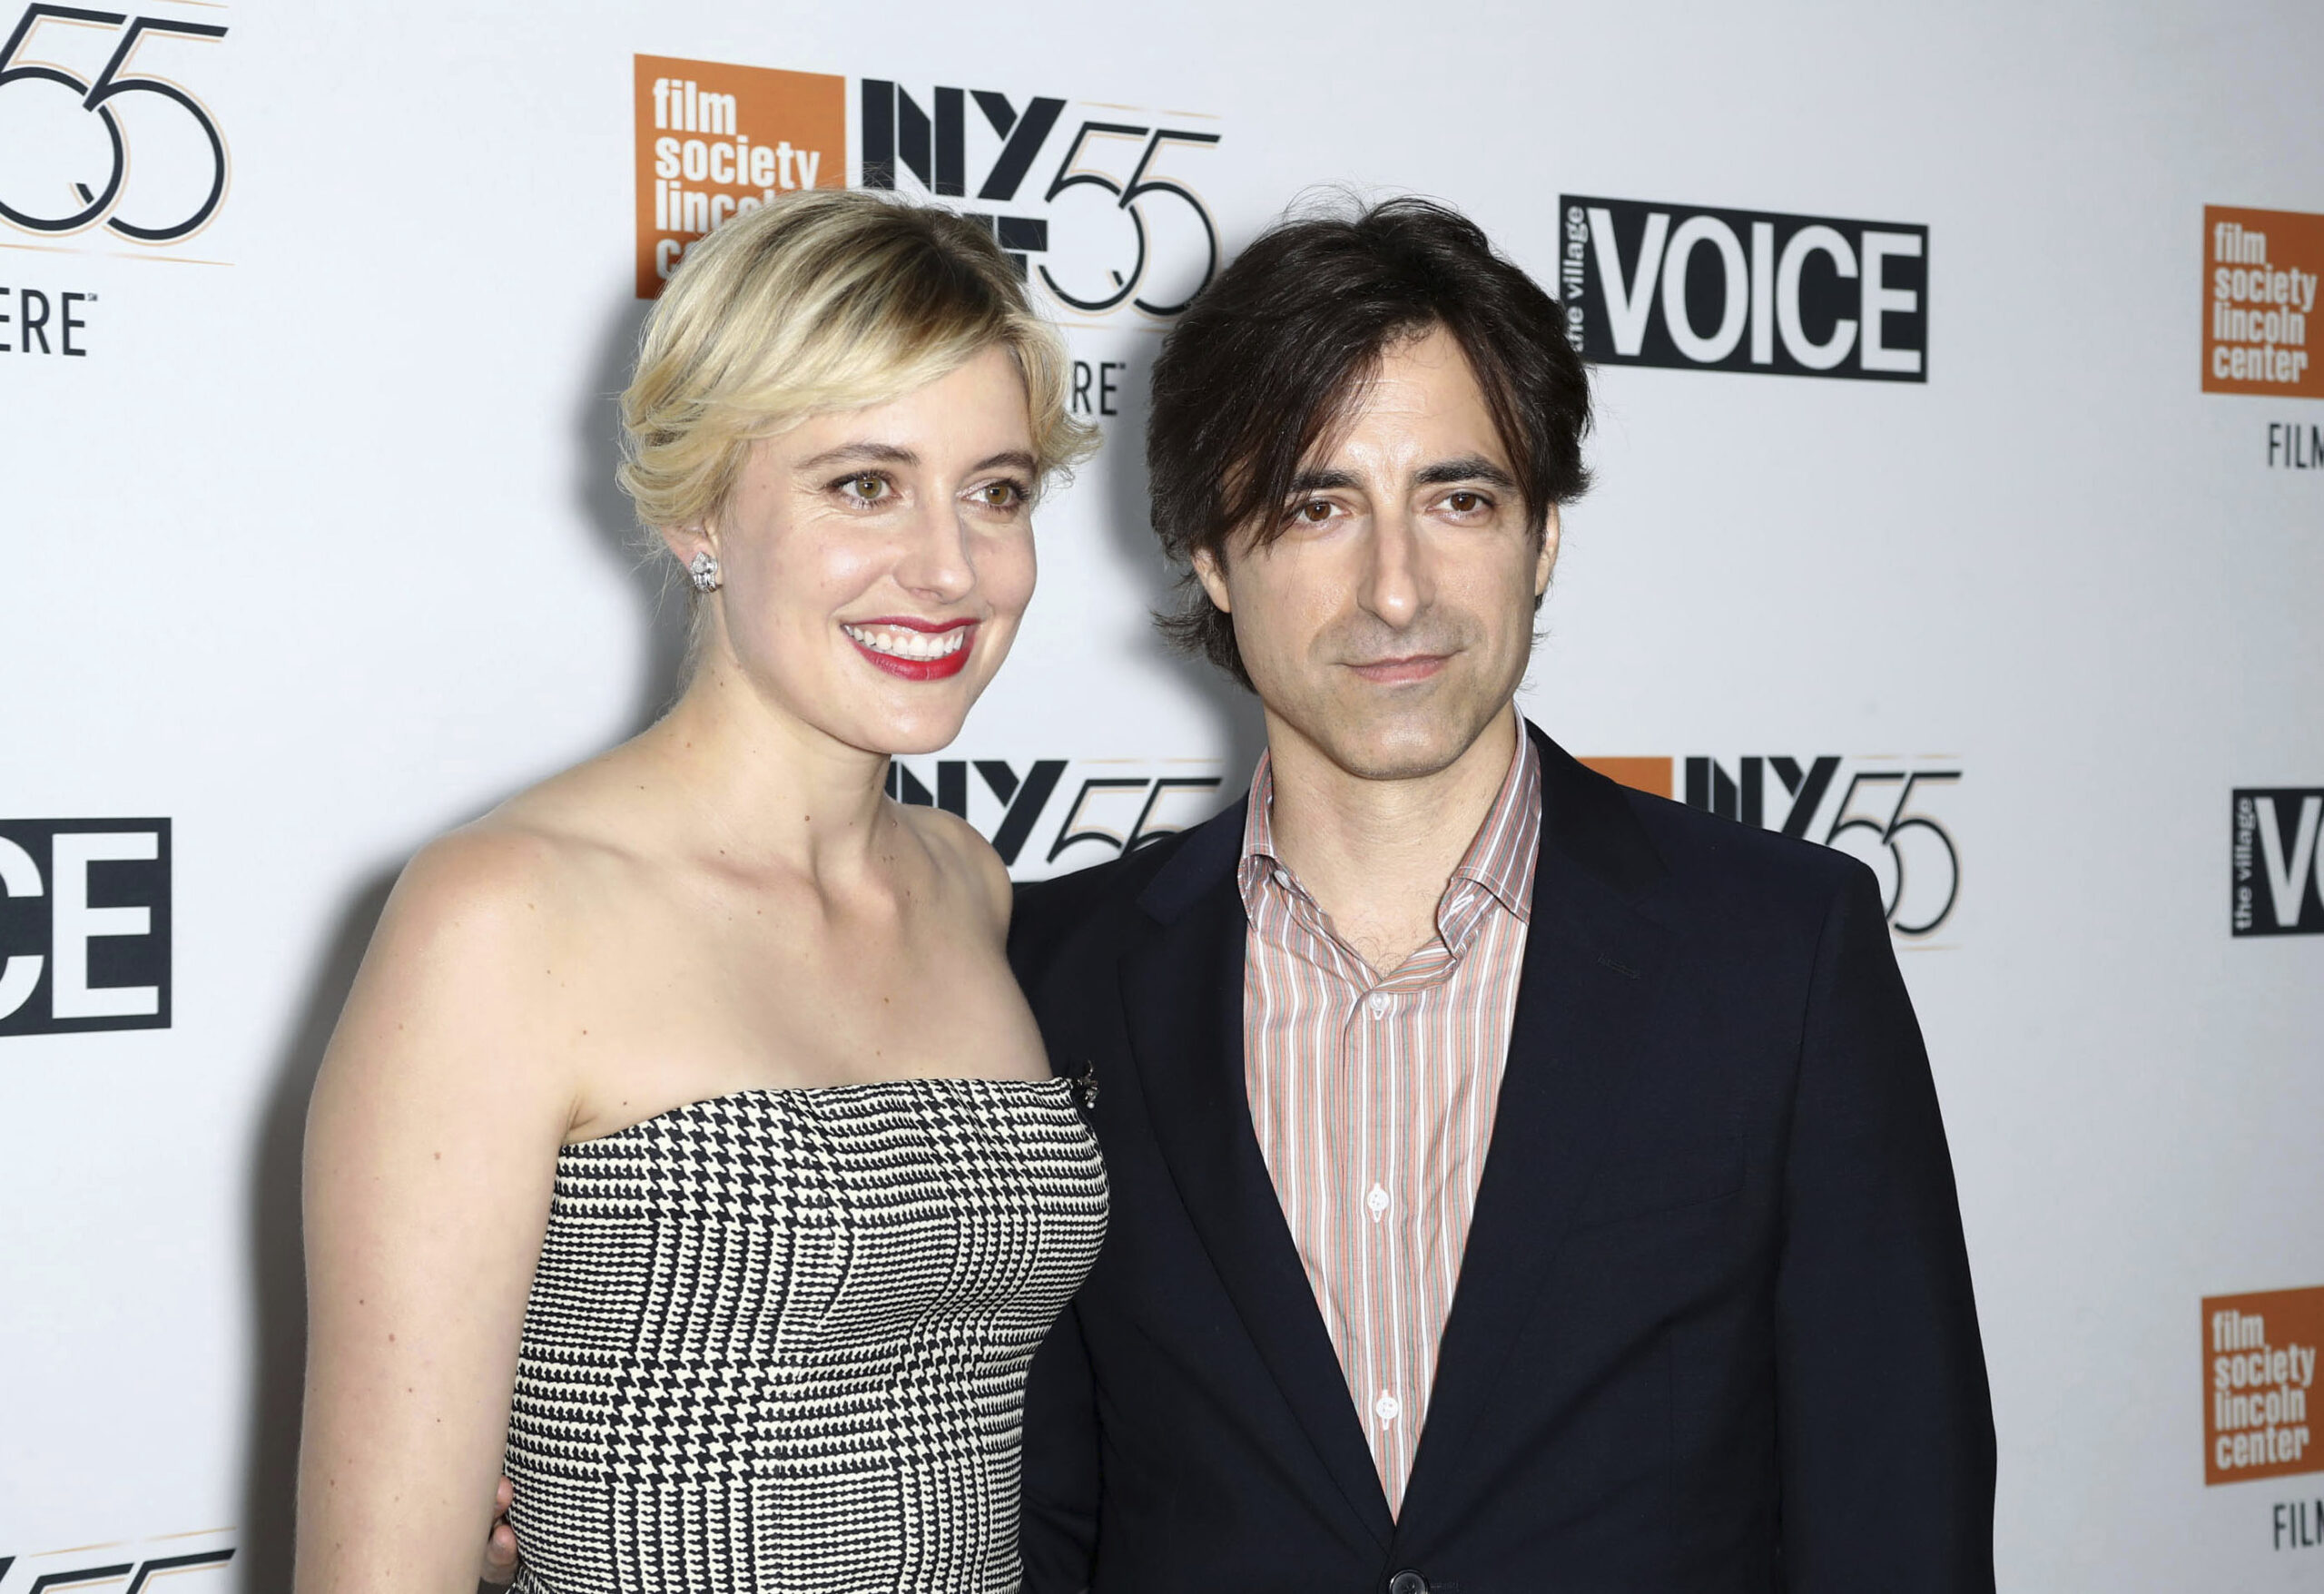 DECEMBER 19th 2023: Filmmakers Greta Gerwig and Noah Baumbach reveal they officially legally married at City Hall in New York City after 12 years of dating. - File Photo by: zz/John Nacion/STAR MAX/IPx 2017 10/8/17 Greta Gerwig and Noah Baumbach at the gala presentation premiere of "Lady Bird" held on October 8, 2017 during the 55th New York Film Festival in New York City. (NYC)